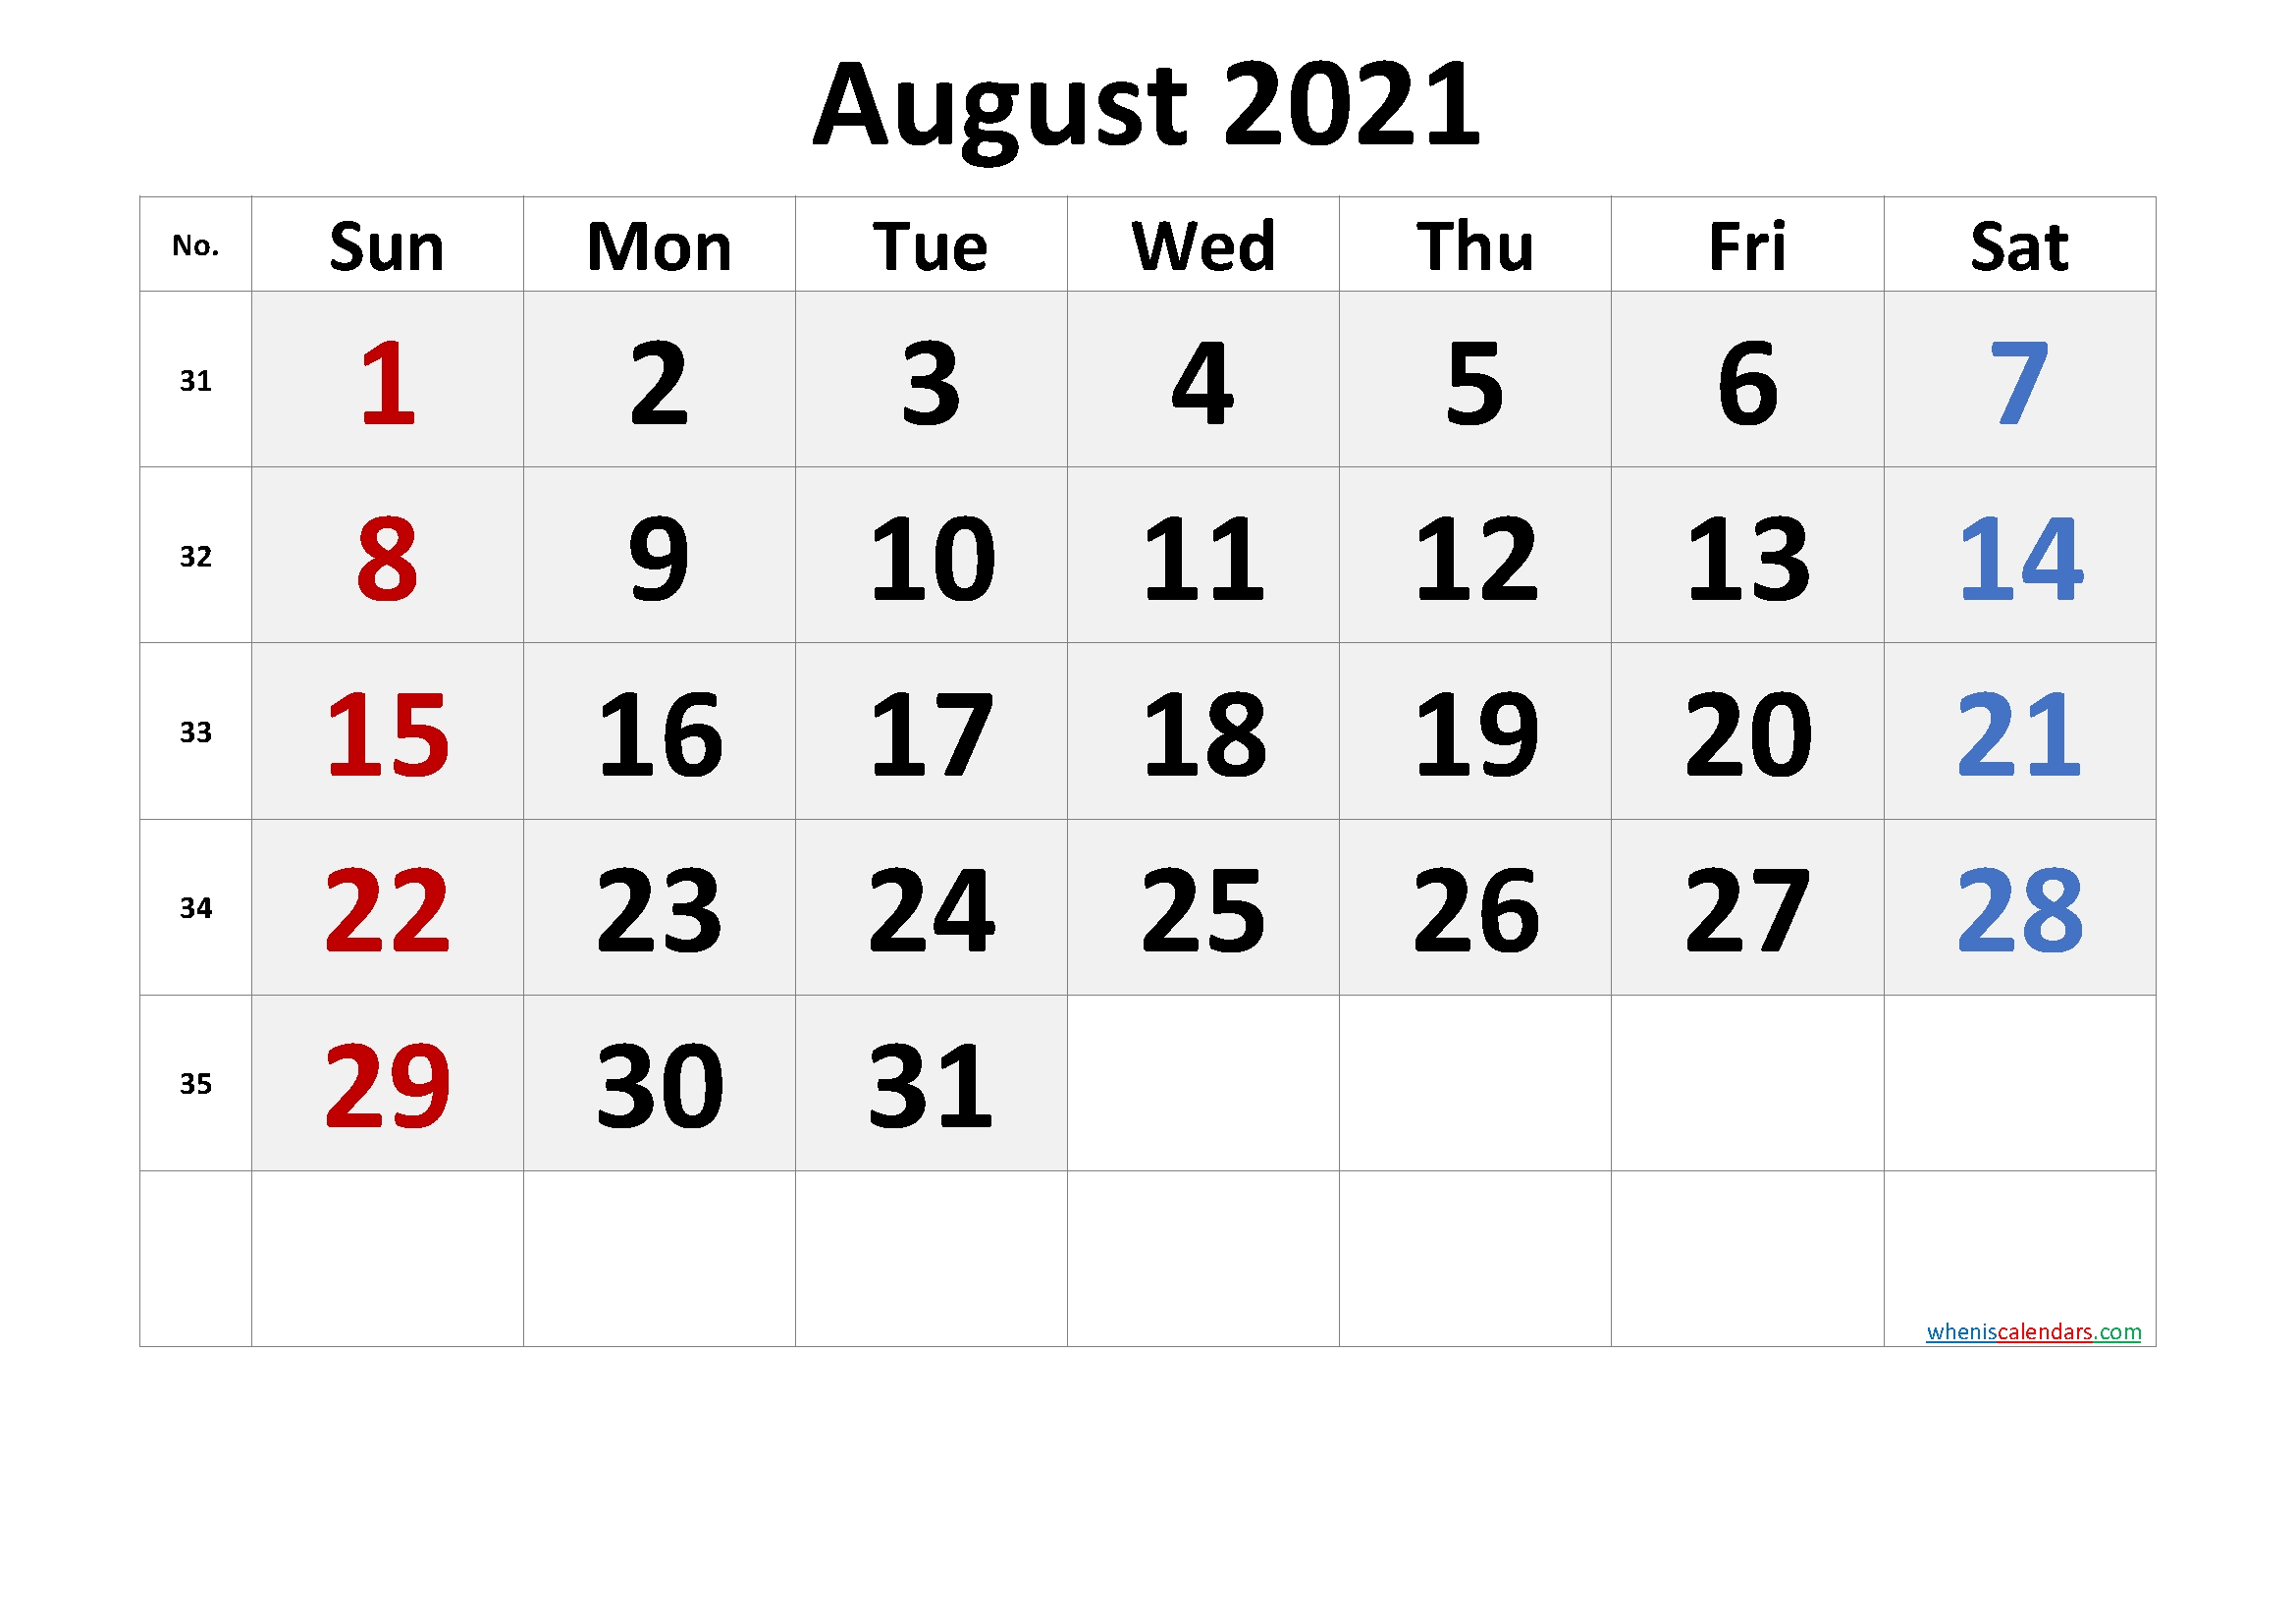 20+ August 2021 Calendar - Free Download Printable Calendar Templates ️ 2021 Calendar For July And August